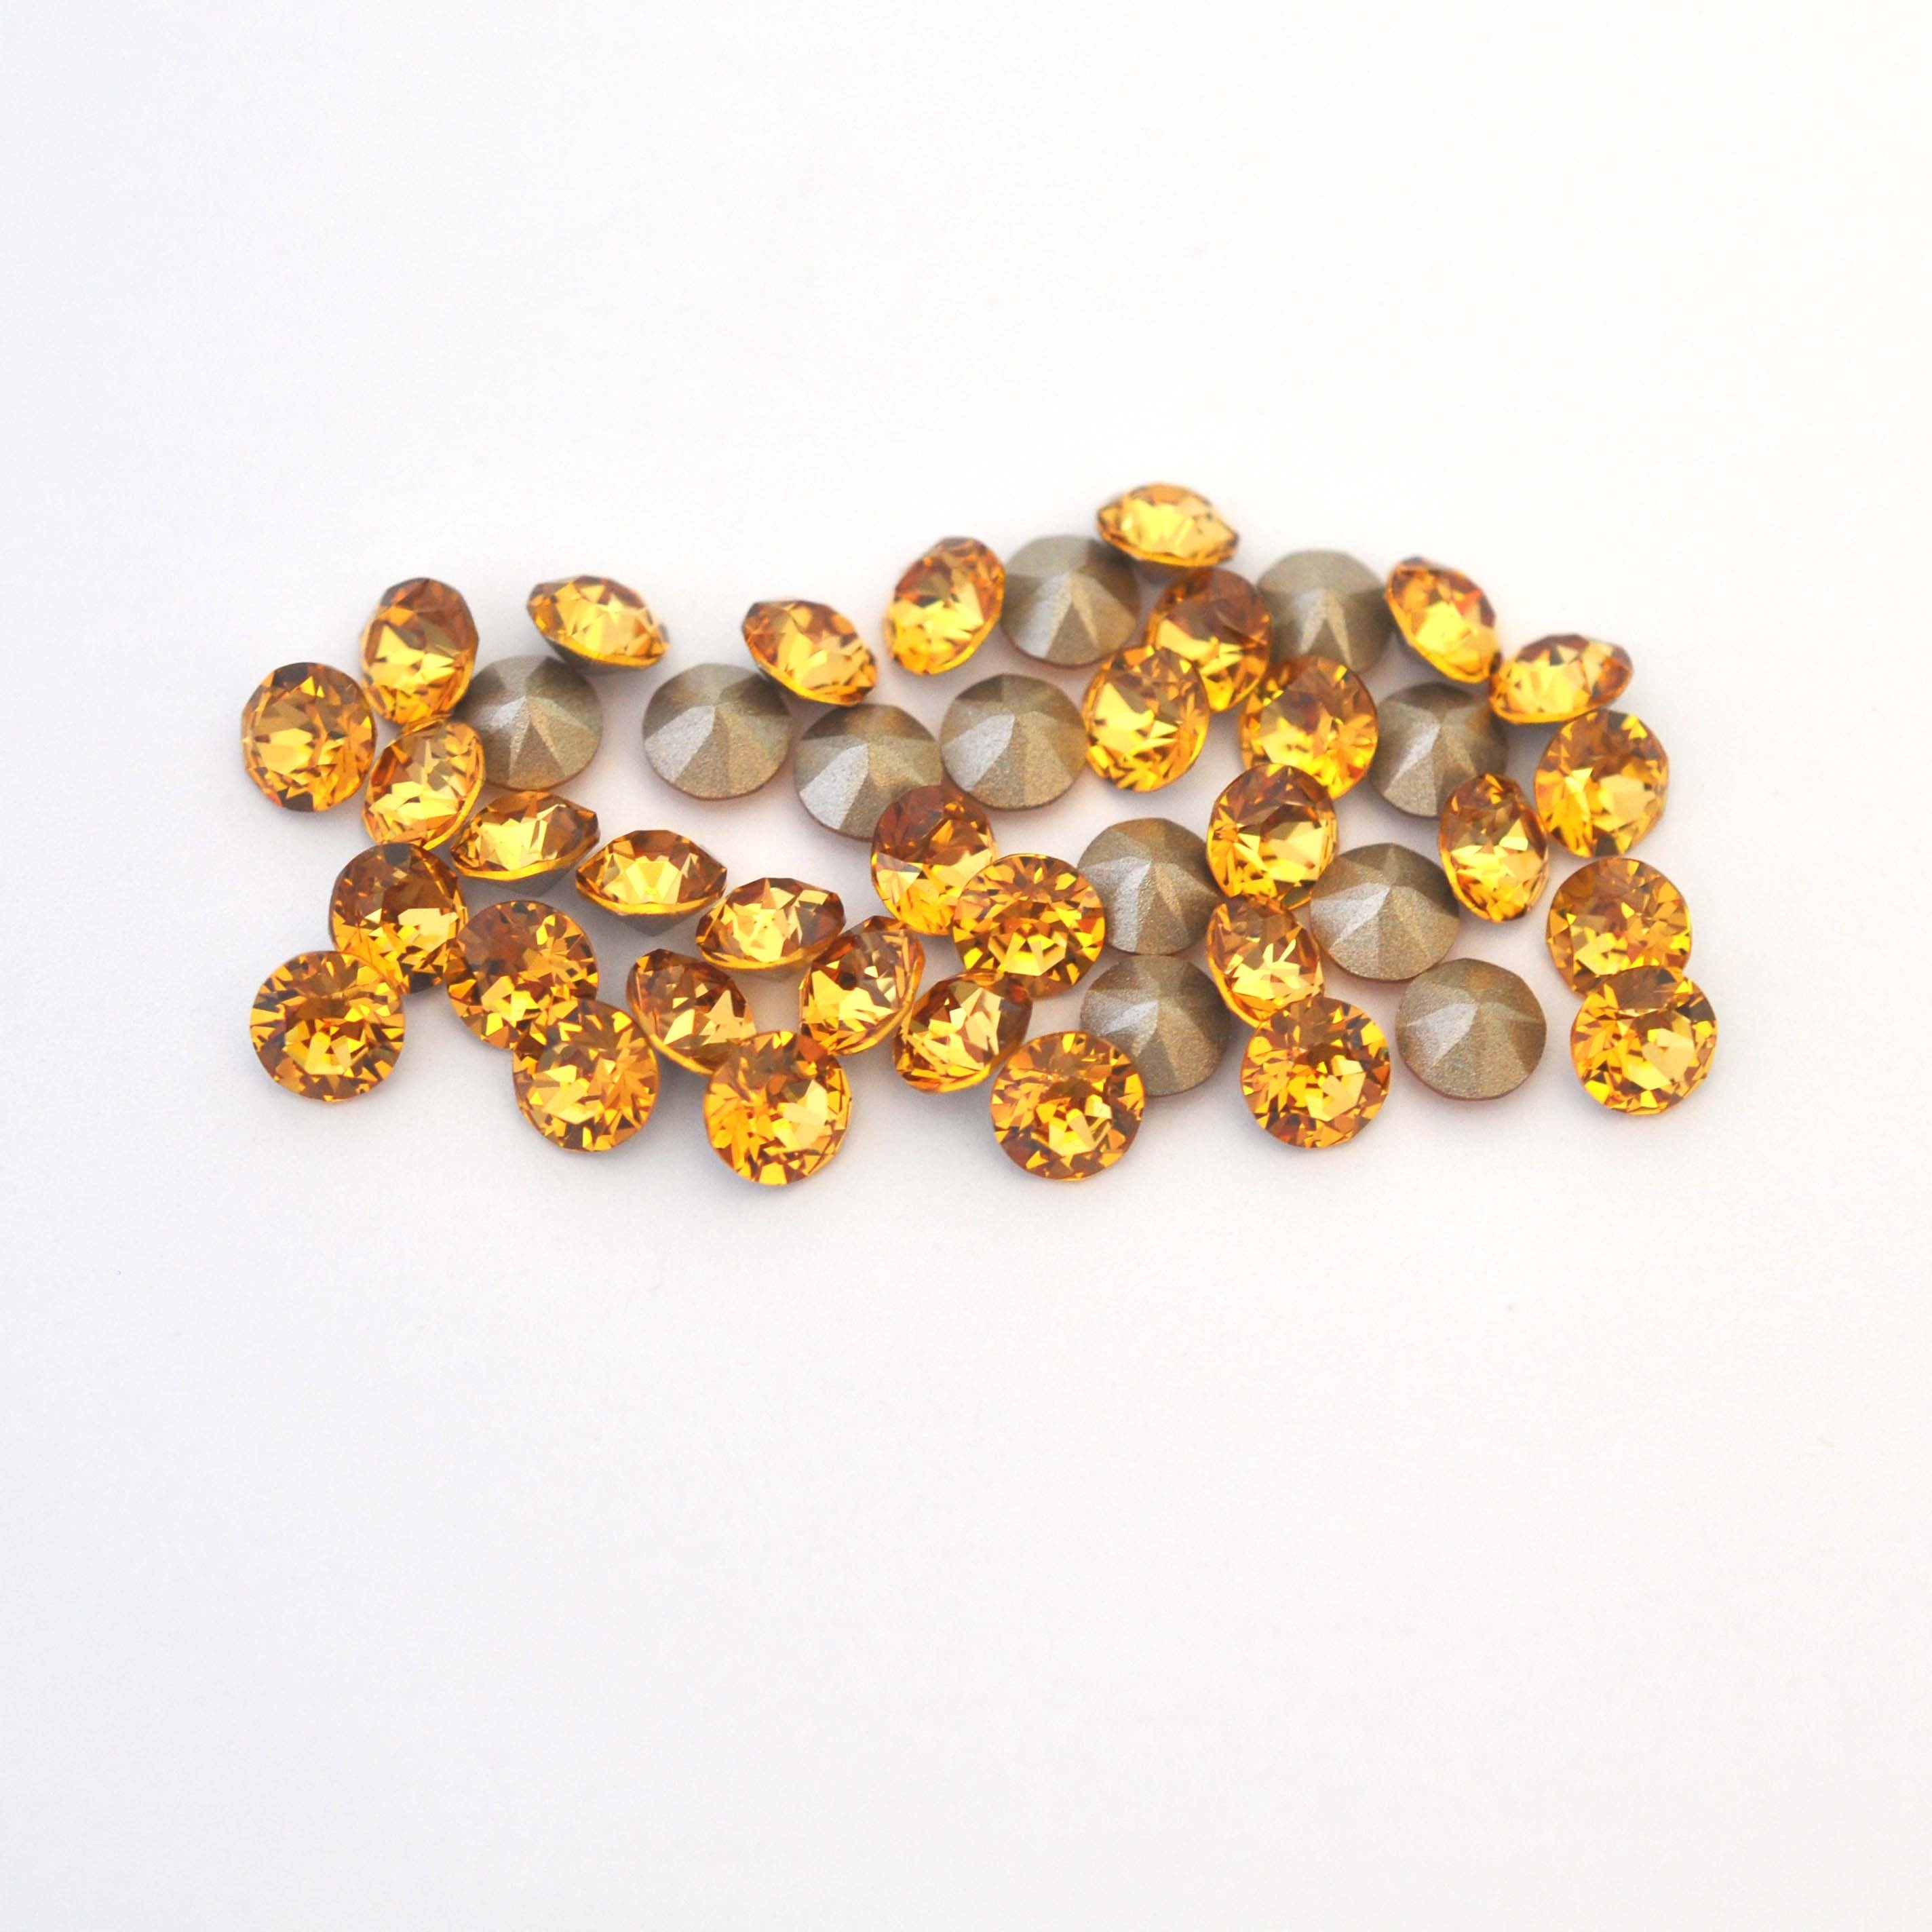 Golden Topaz 1088 Pointed Back Chaton Barton Crystal 29ss, 6mm